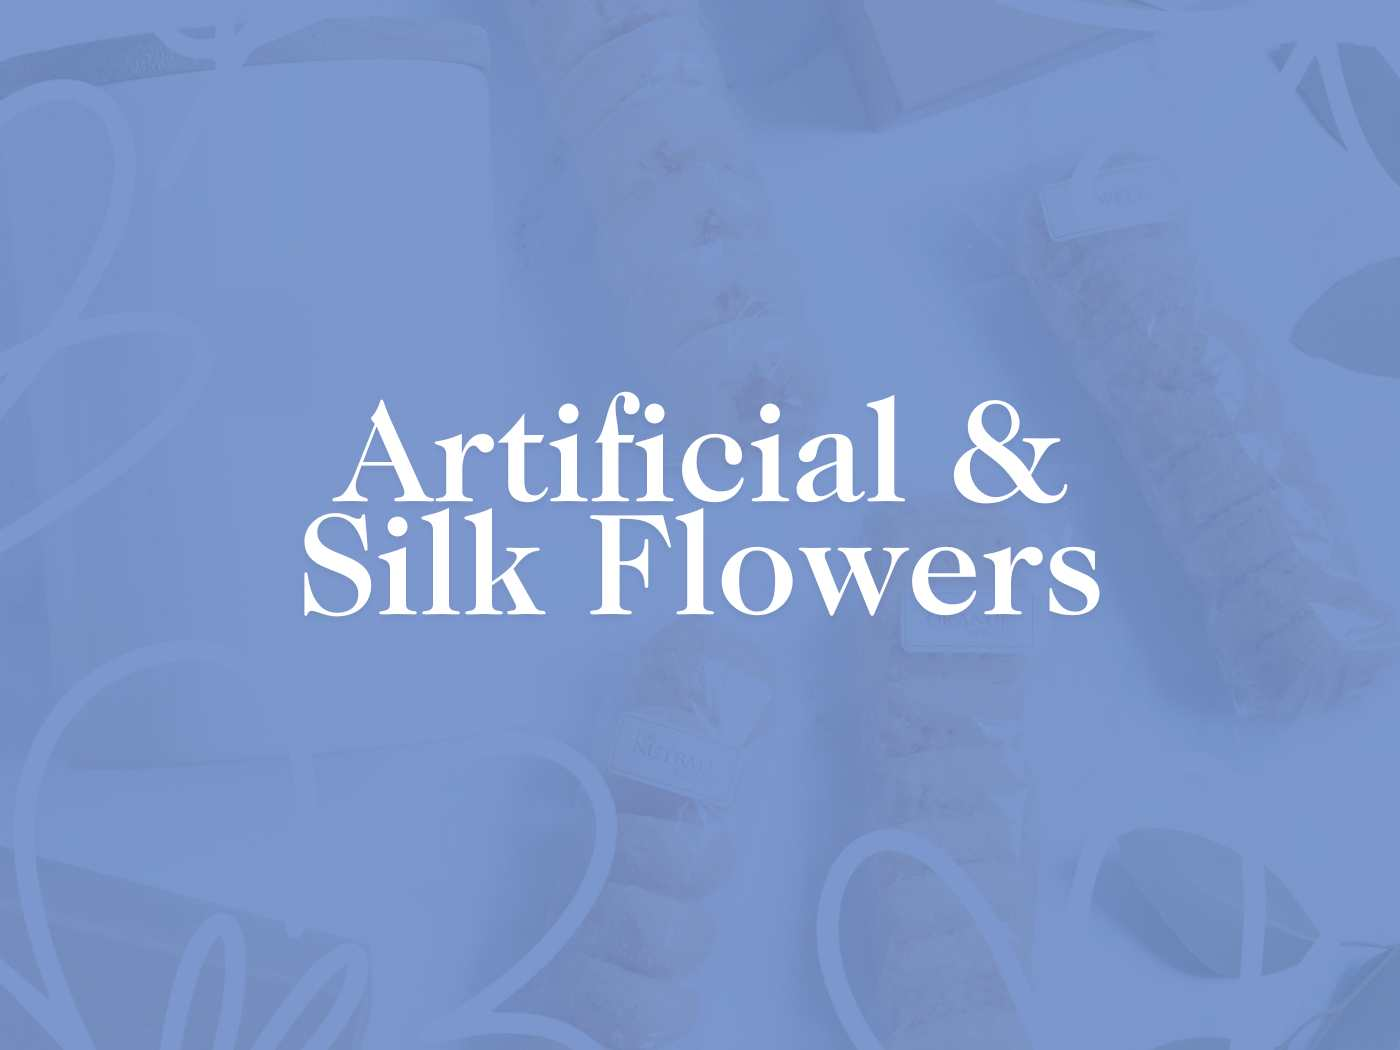 Text overlay stating 'Artificial & Silk Flowers' set against a subtle backdrop of floral design elements, suggesting a theme of elegance and longevity in home decor, from Fabulous Flowers and Gifts.